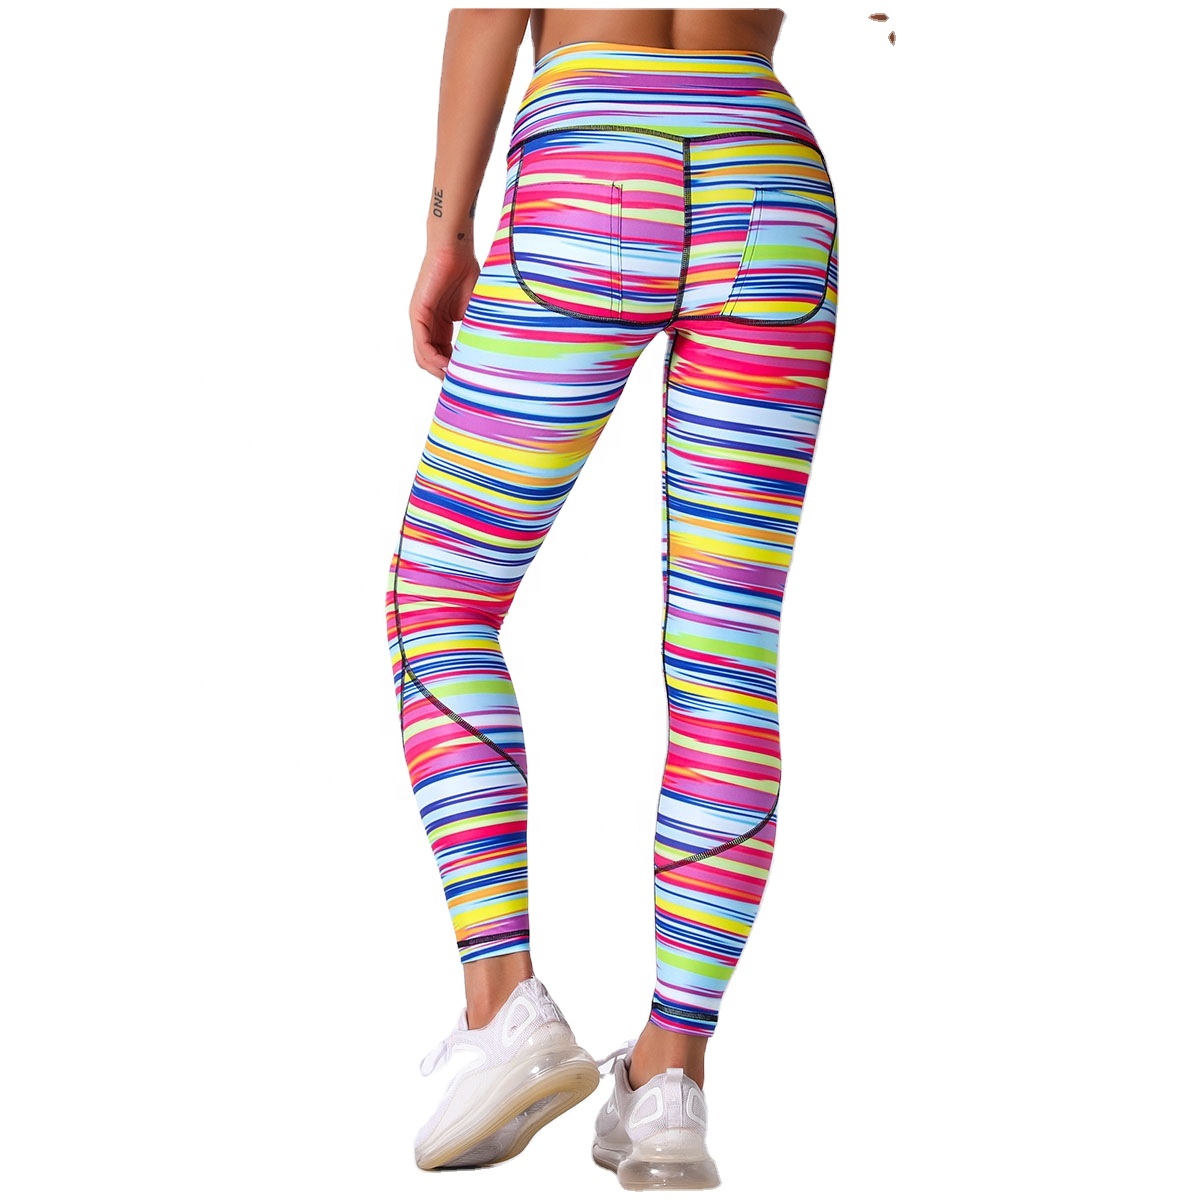 OEM/ODM Manufacturer Wholesale Leggings -
 Slim Leggings New Style Tight Yoga Pants High Waist Printed Sports Fitness Recycled Breathable Seamless – Westfox